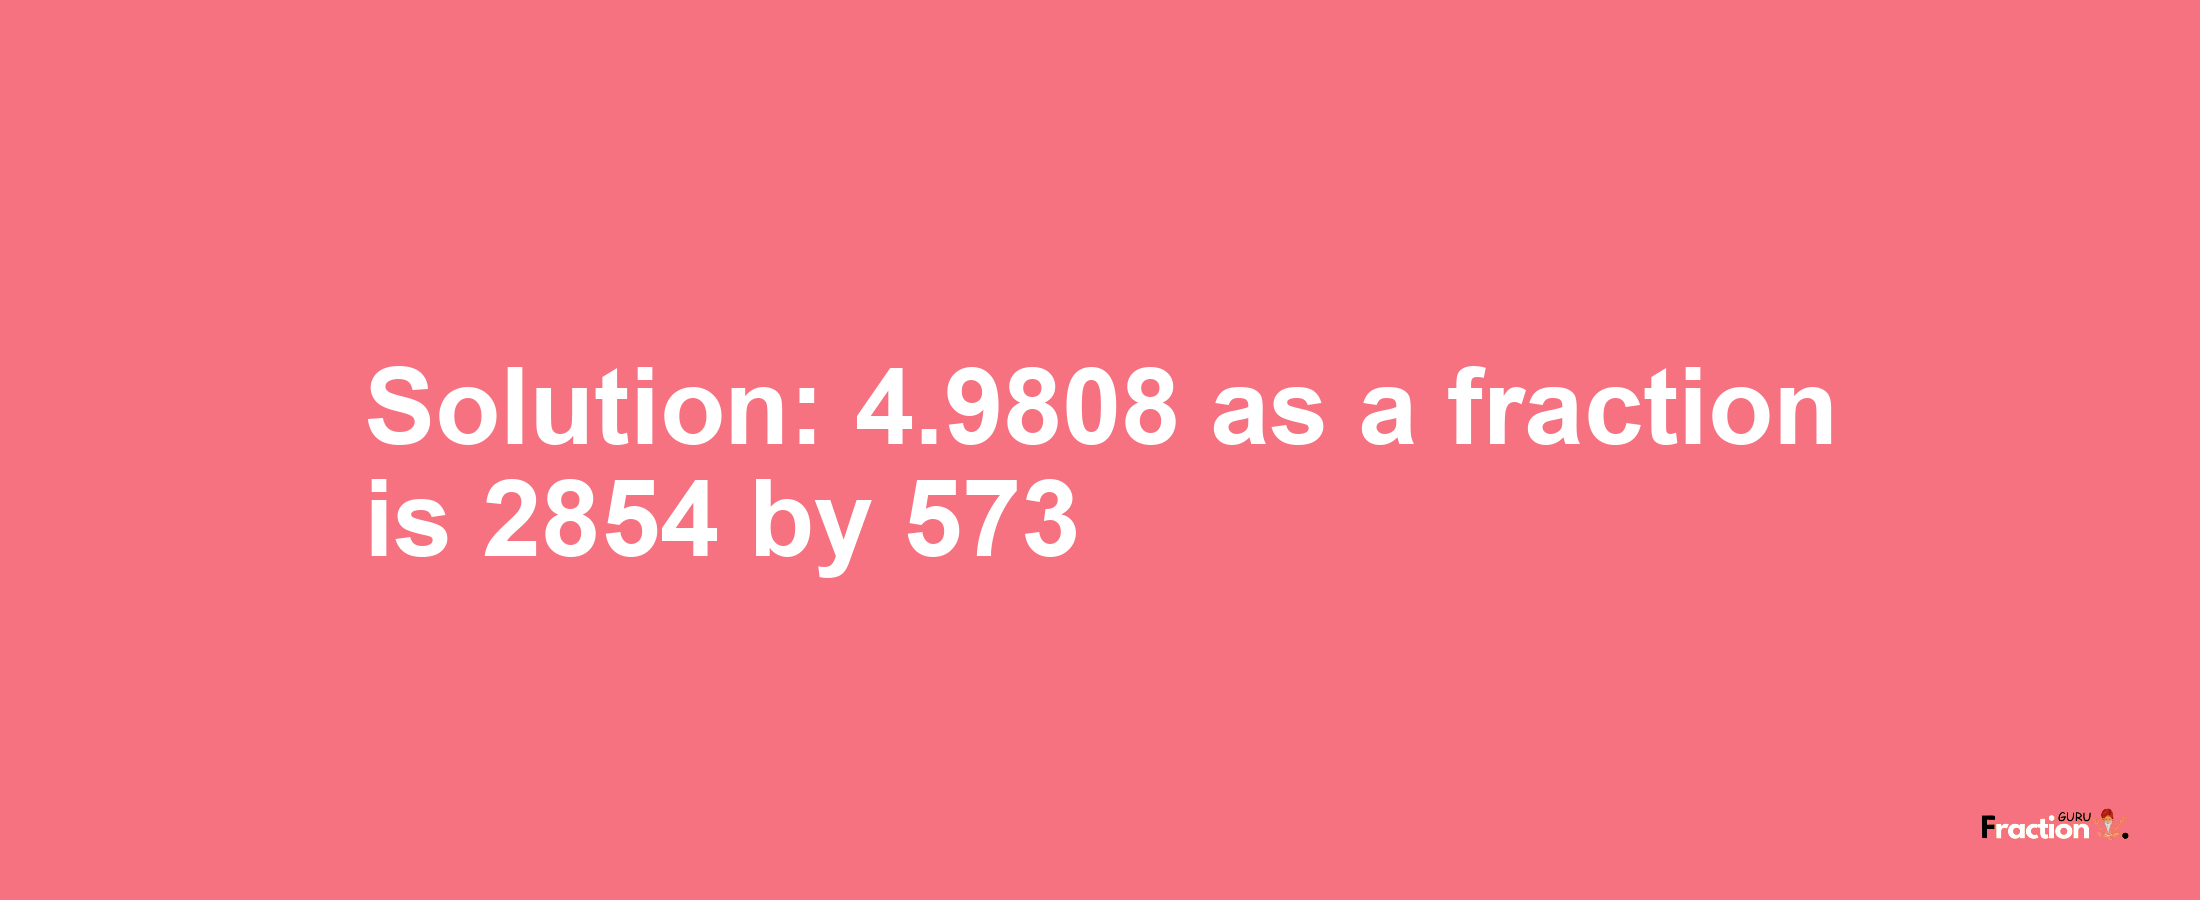 Solution:4.9808 as a fraction is 2854/573